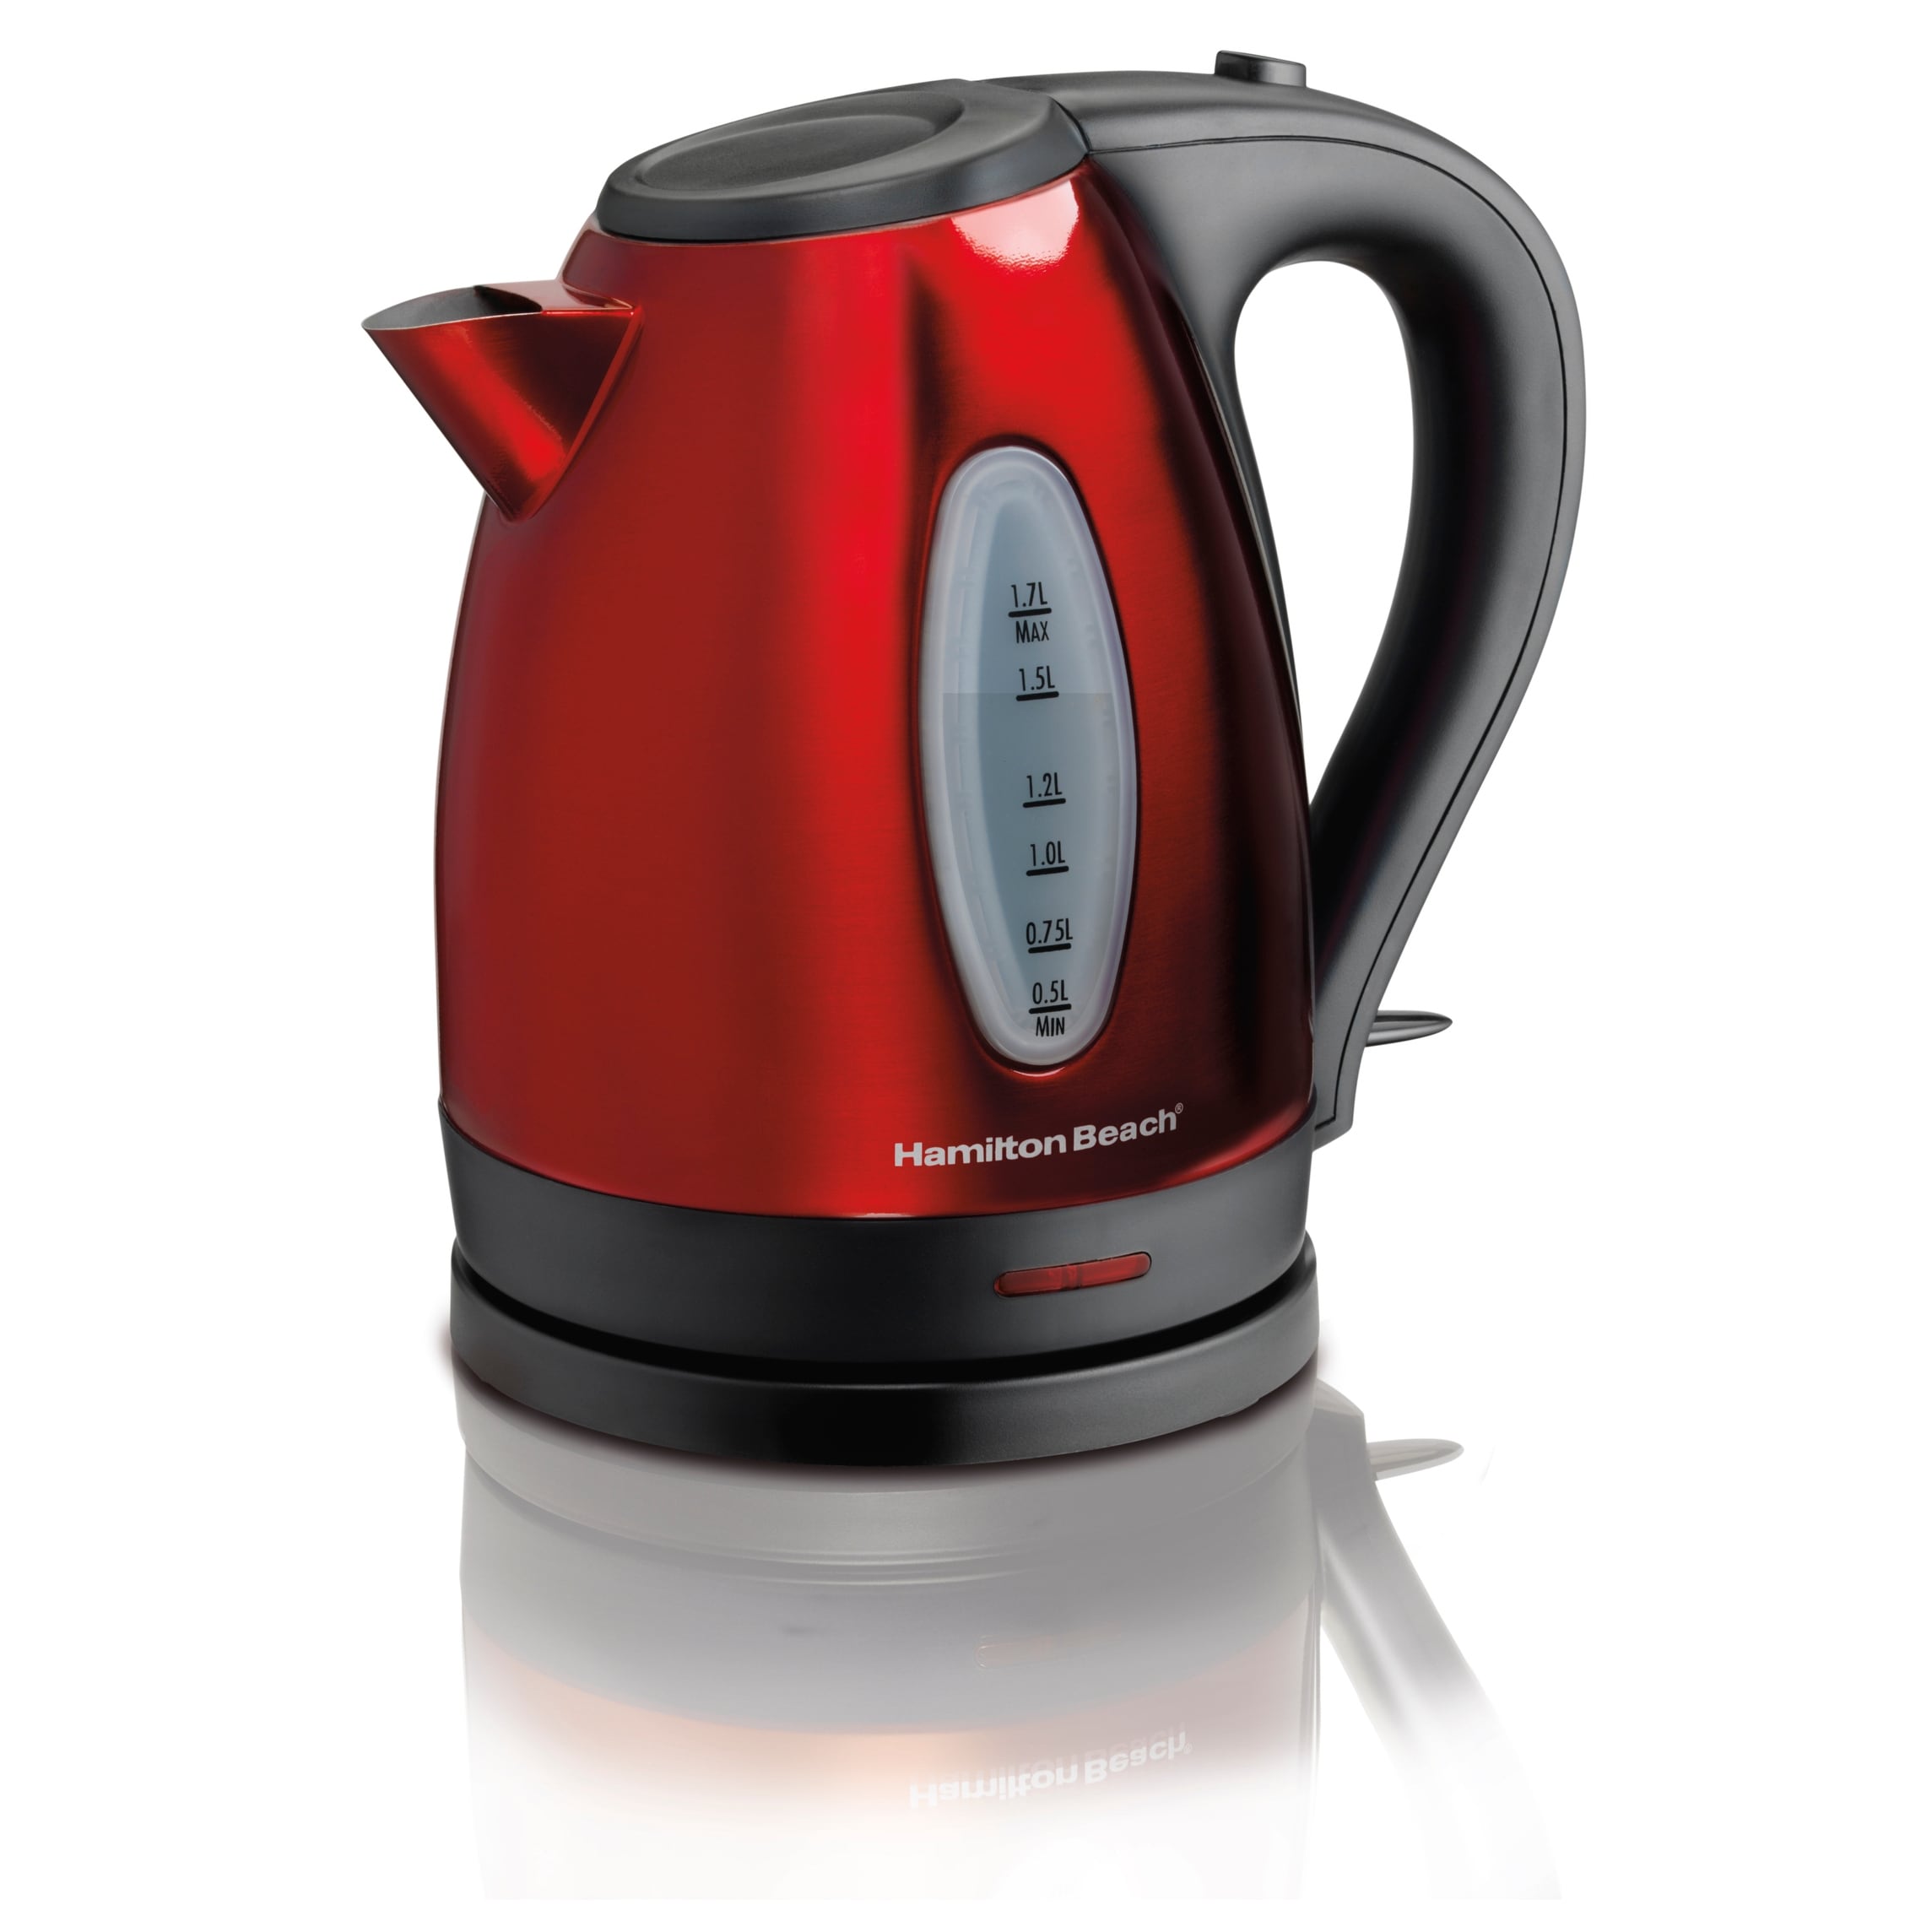 Brentwood KT-1770 1.2L Stainless Steel Cordless Electric Kettle - Brentwood  Appliances